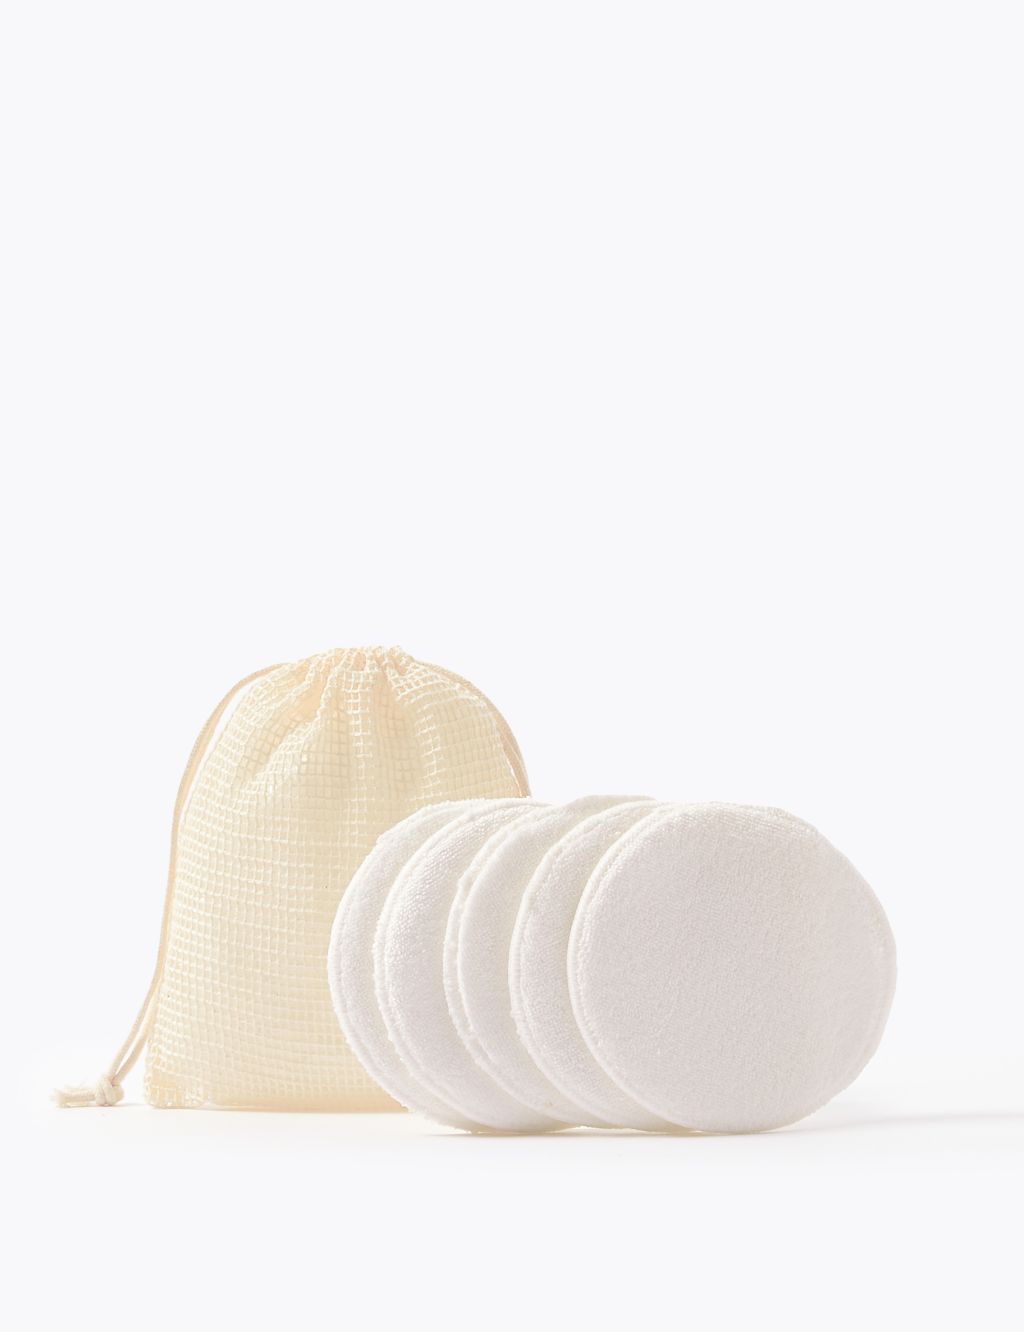 Cowshed Reusable Cotton Pads - Cowshed